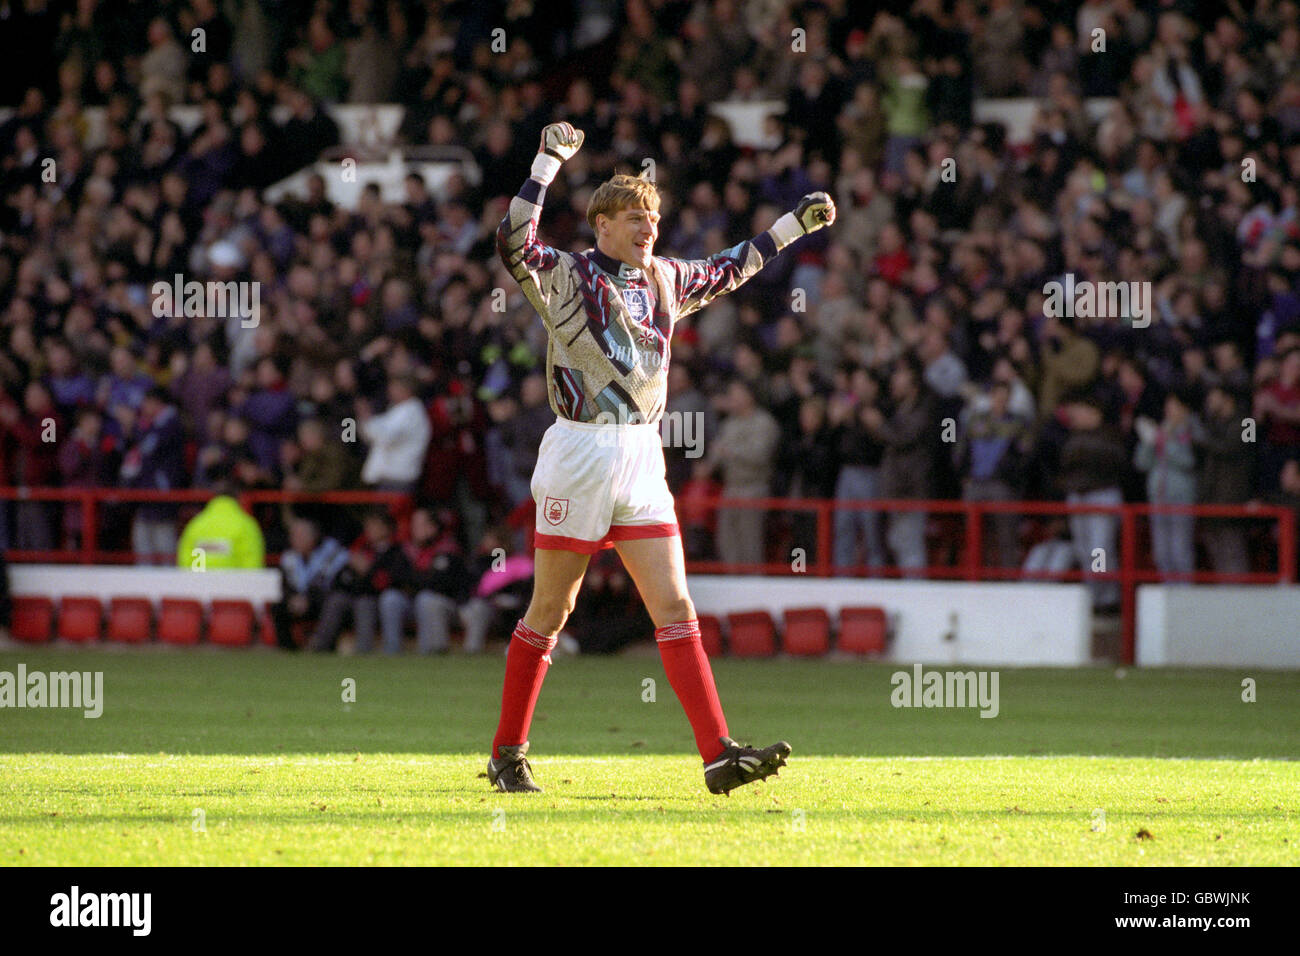 Soccer - Endsleigh League Division One - Nottingham Forest v Tranmere Rovers - City Ground. Nottingham Forest's goalkeeper Tommy Wright celebrates a goal. Stock Photo